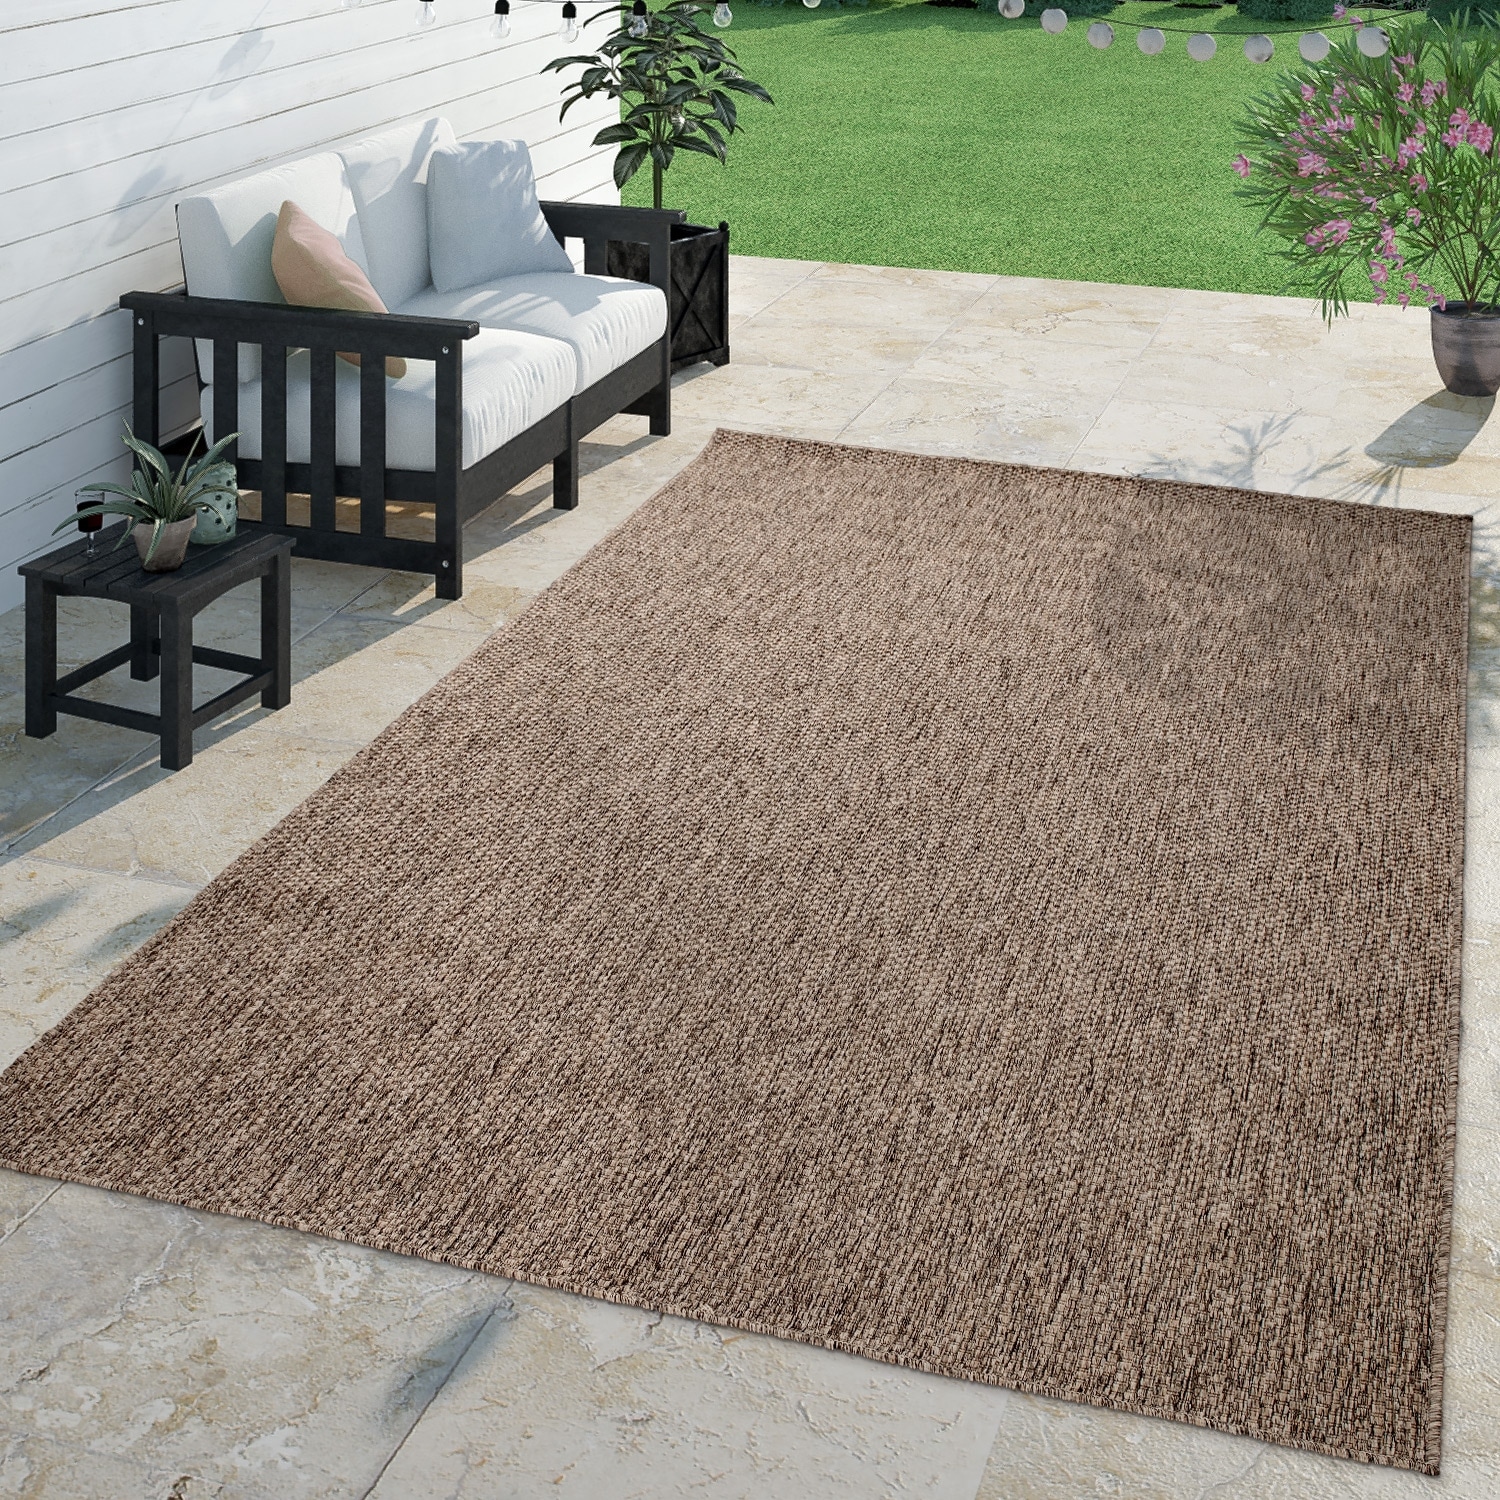 https://ak1.ostkcdn.com/images/products/is/images/direct/6768e7f80b81eb9679c0aa93c7aac476daee543e/Solid-Outdoor-Rug-Waterproof-for-Patio-in-different-plain-colors.jpg